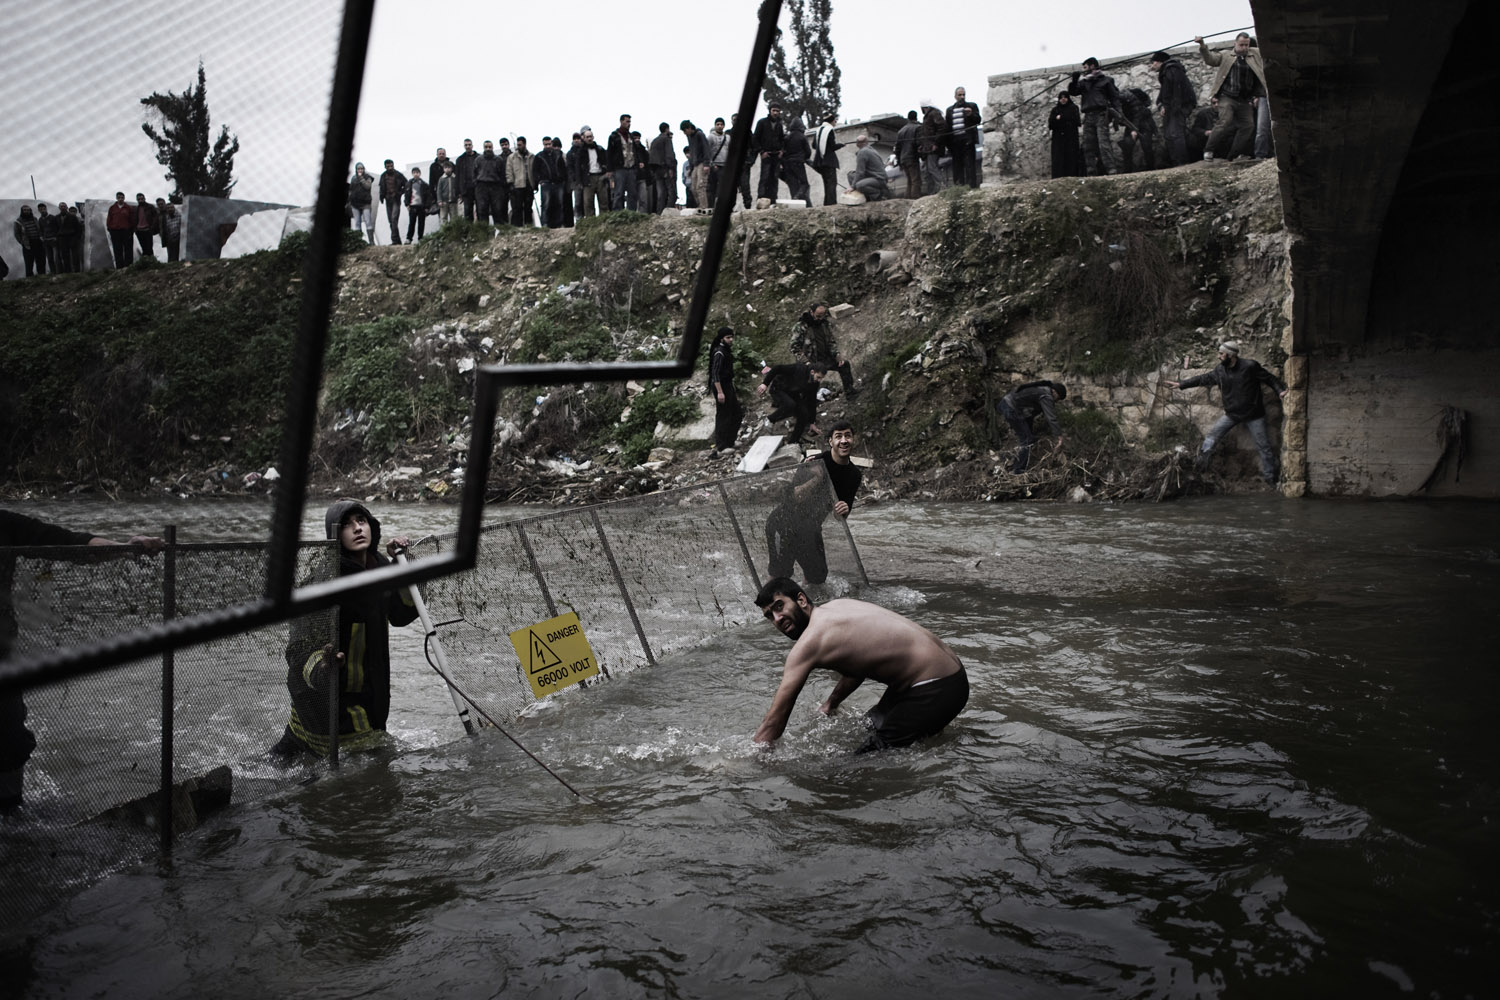 The day after victims of the massacre were first discovered, officials moved fencing into the river to help catch additional bodies as they floated downstream near Aleppo, Jan. 30, 2013. (Alessio Romenzi)